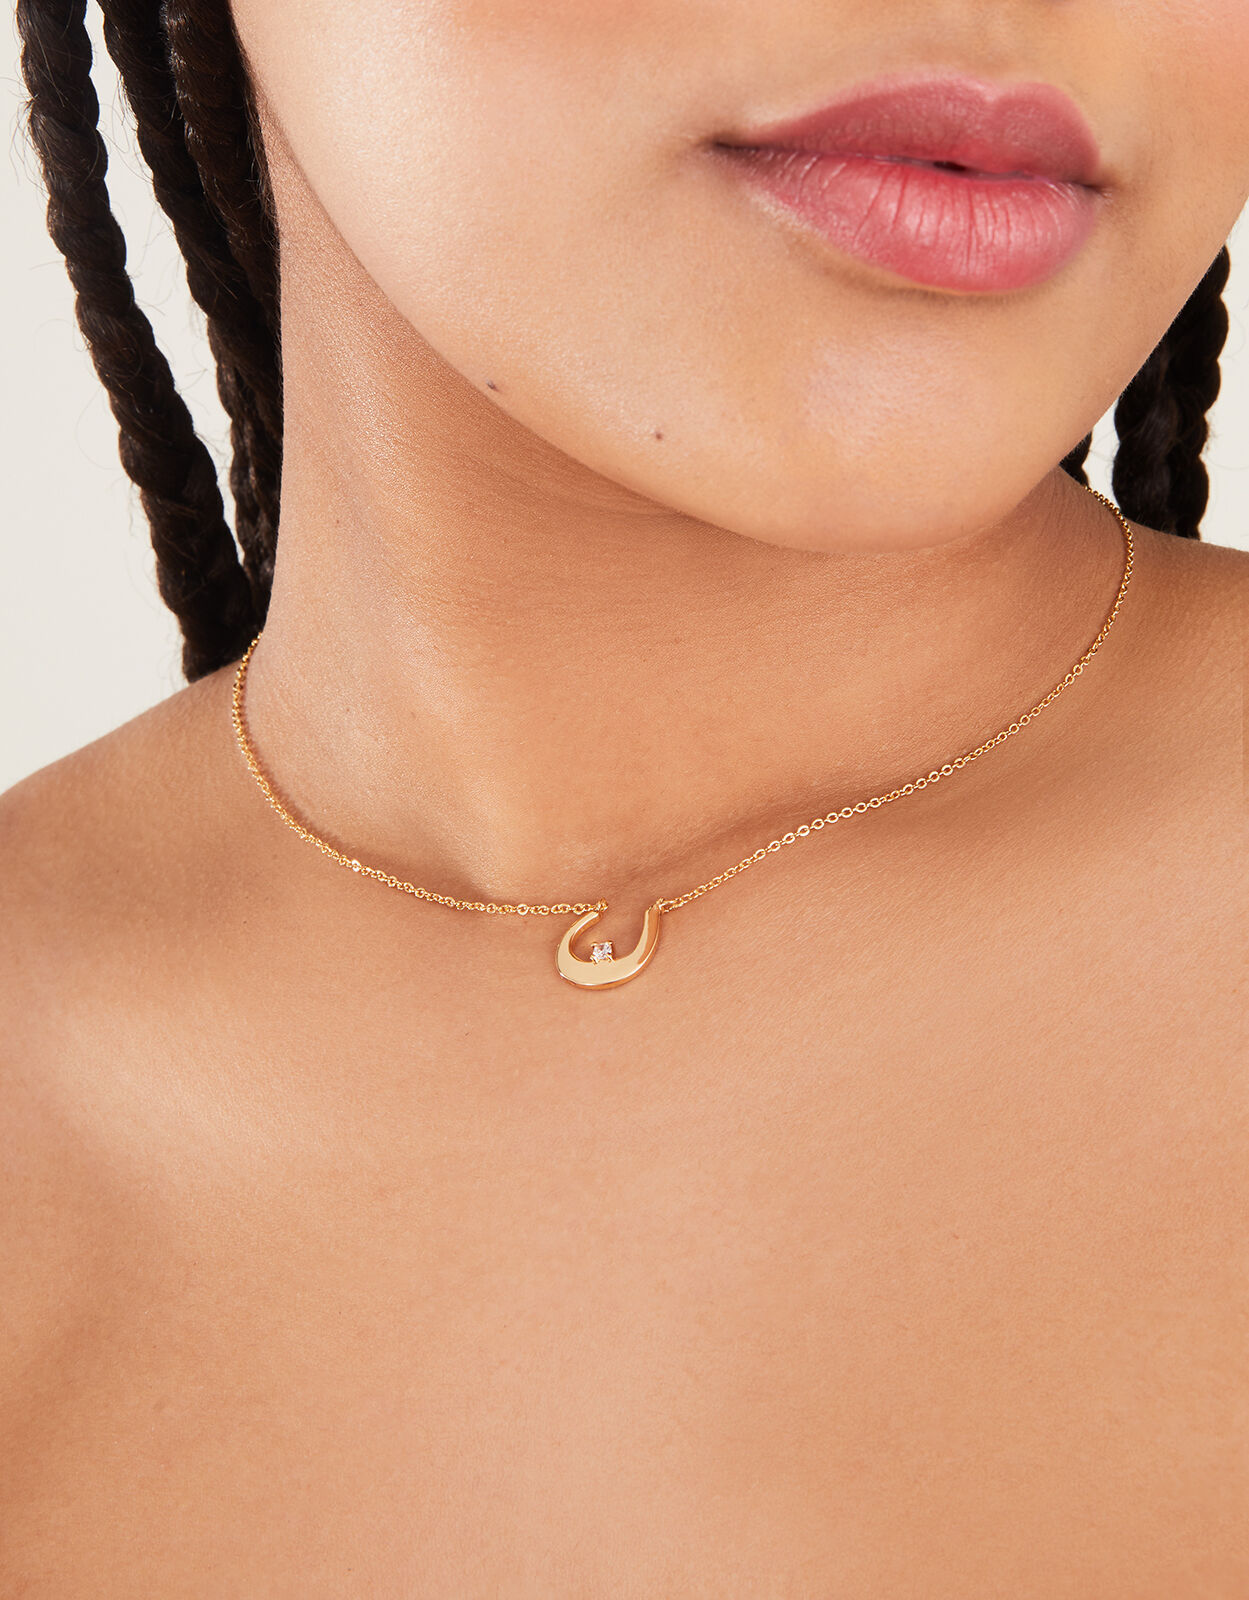 Necklaces Arabic Initial Letter Necklaces With Birthstone For Women Gold  Choker Chain Personalized Coin Pendant & Necklace Jewelry Gifts From Eytte,  $11.34 | DHgate.Com